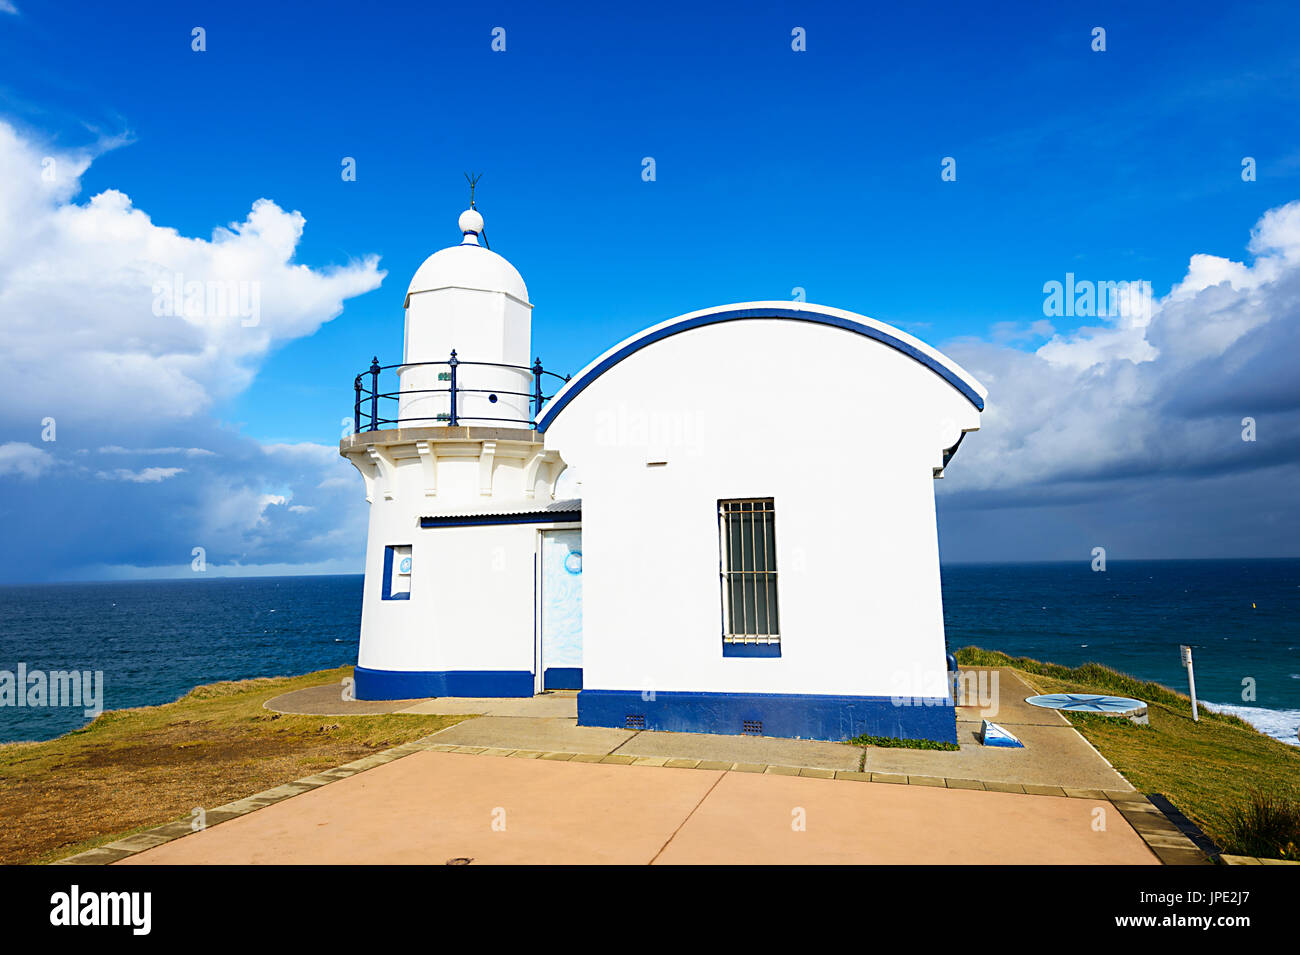 Tacking Point Lighthouse, Port Macquarie, New South Wales, Australia, New South Wales, Australien Stockfoto